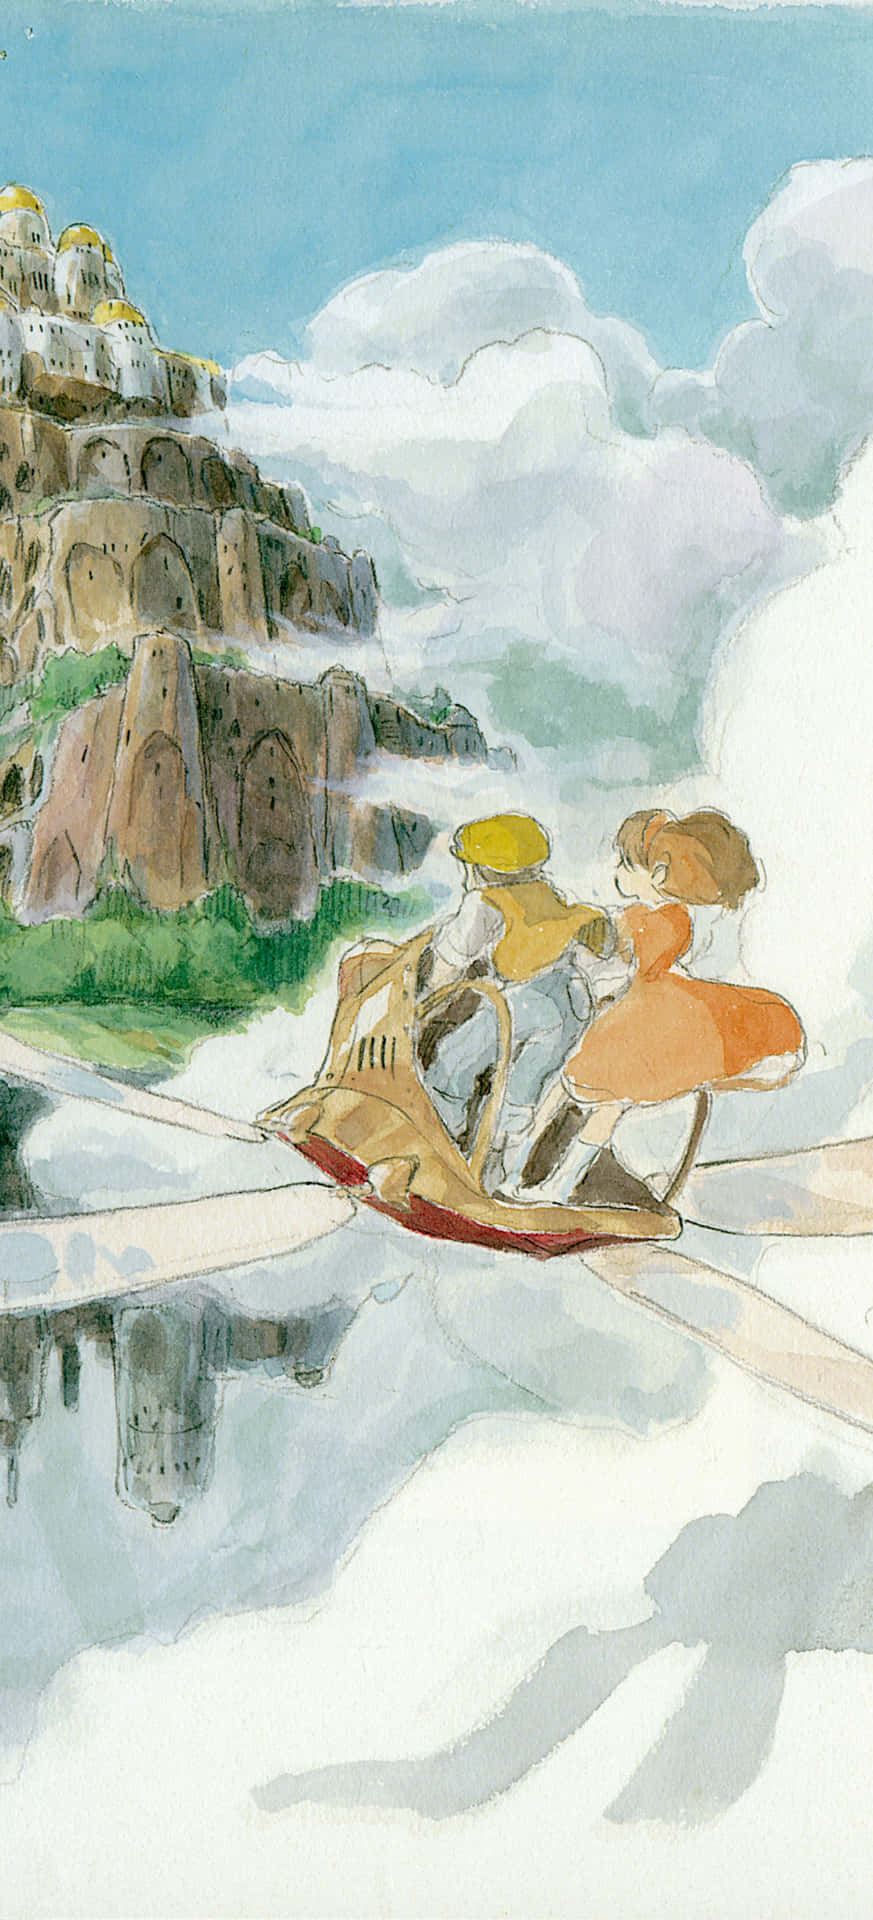 Get Ready To Explore The World Of Studio Ghibli With This Phone Wallpaper